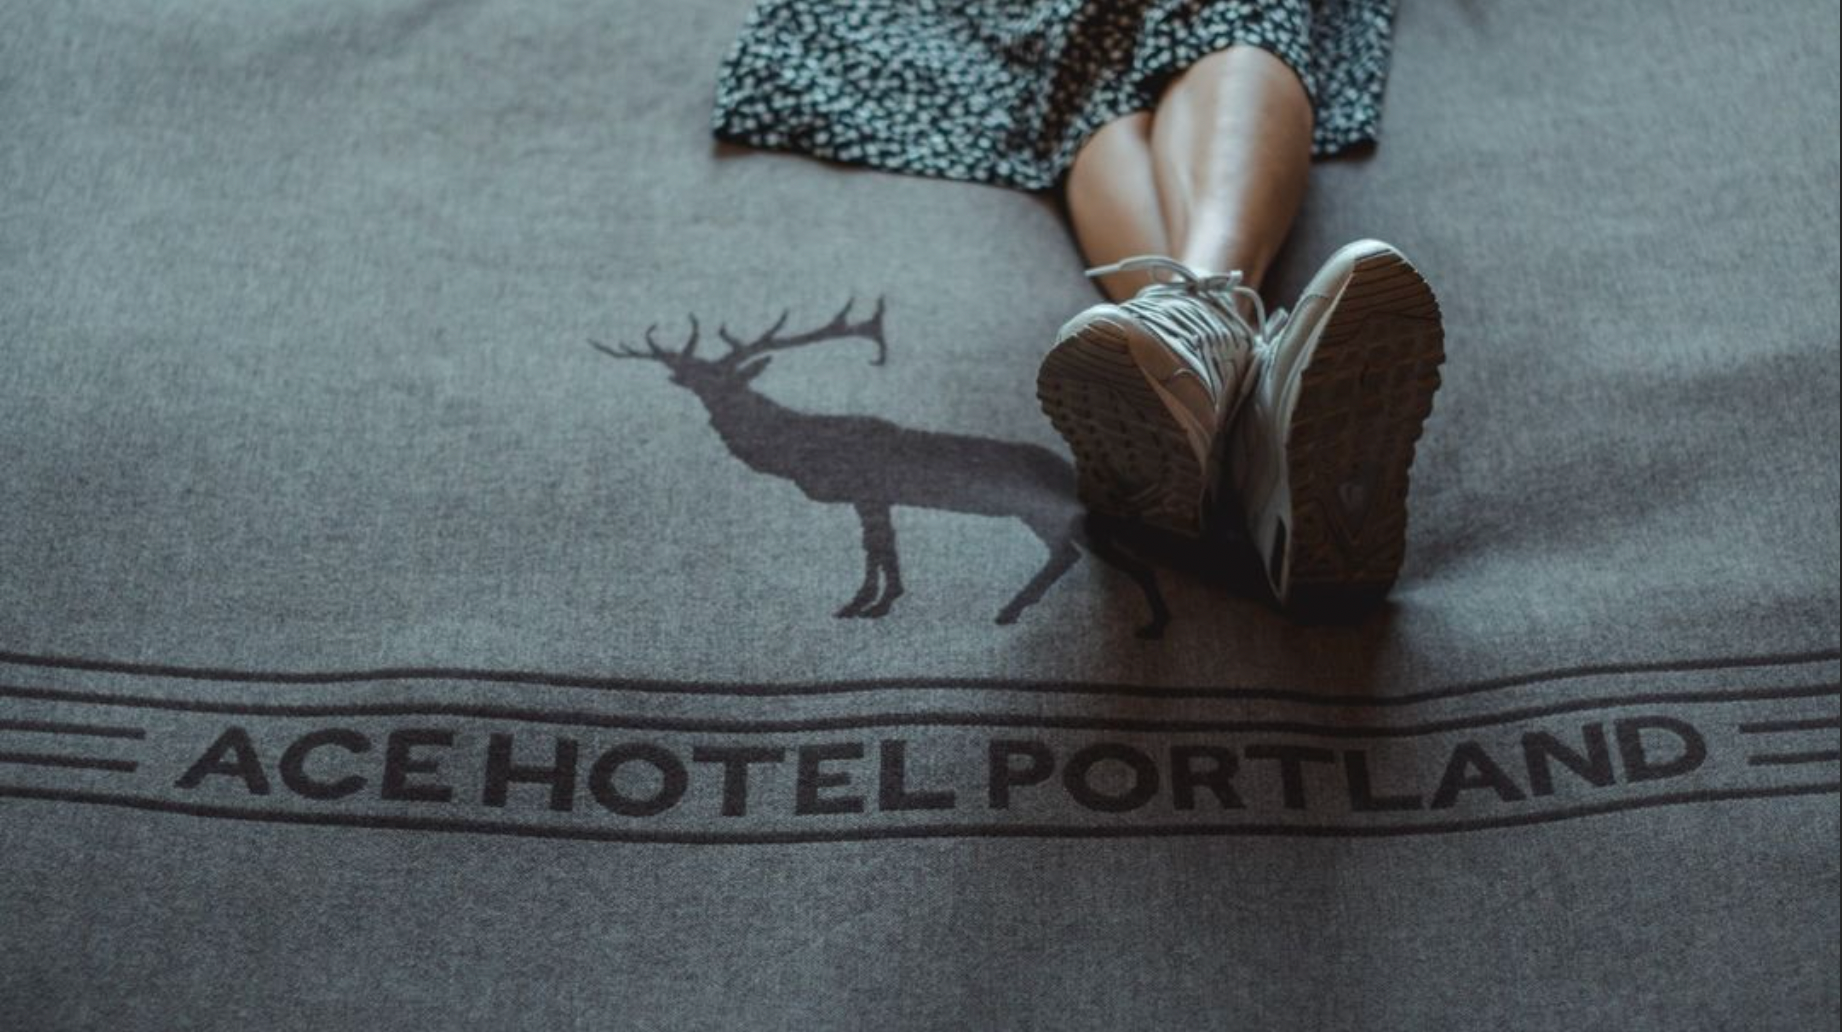 A close up of a persons feet kicked up on bed with a an Ace Hotel Portland wool blanket.